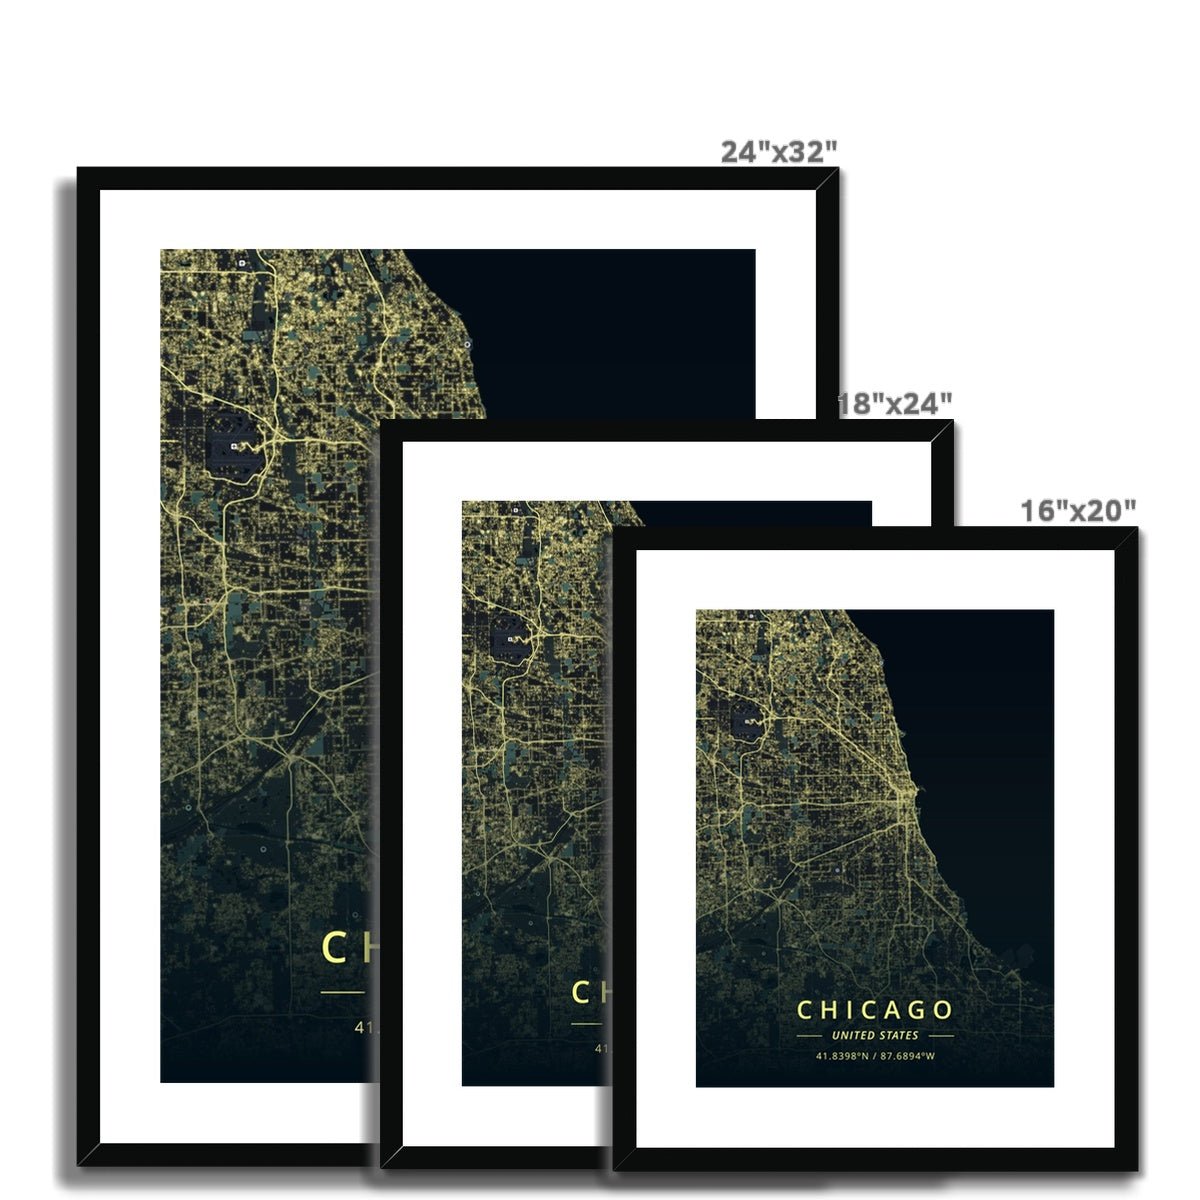 Nightlight - Chicago 5 - Map Matte Print by doingly